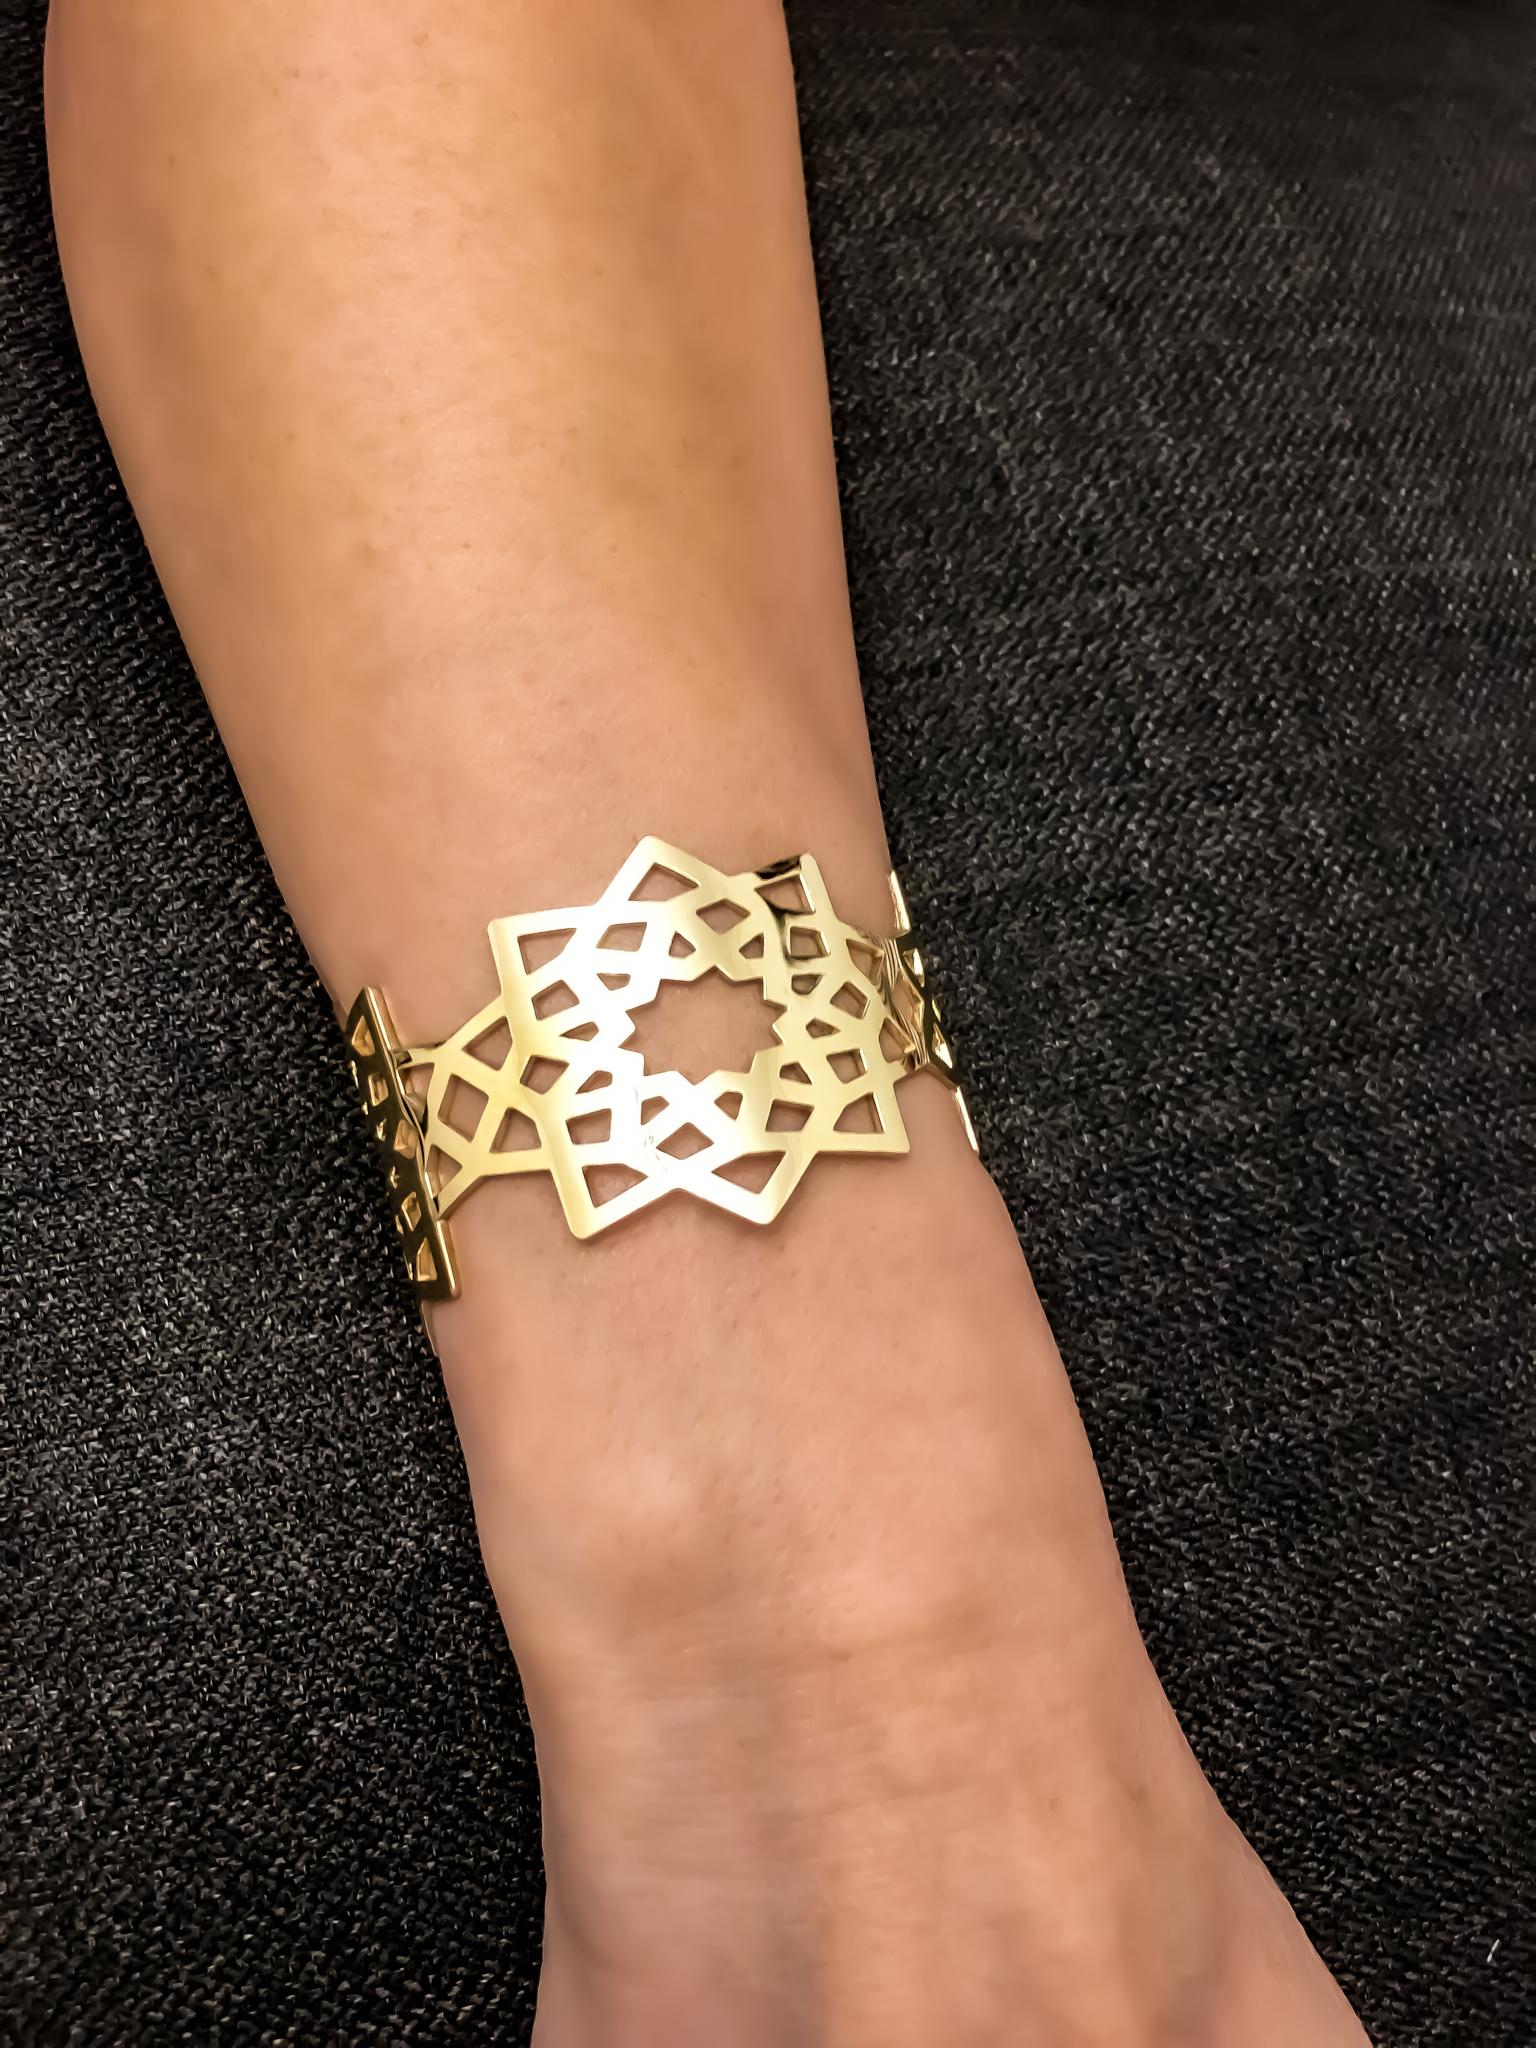 Arabesque Deco Andalusian Style Cuff Bracelet in 18kt Gold In New Condition For Sale In Dubai, AE